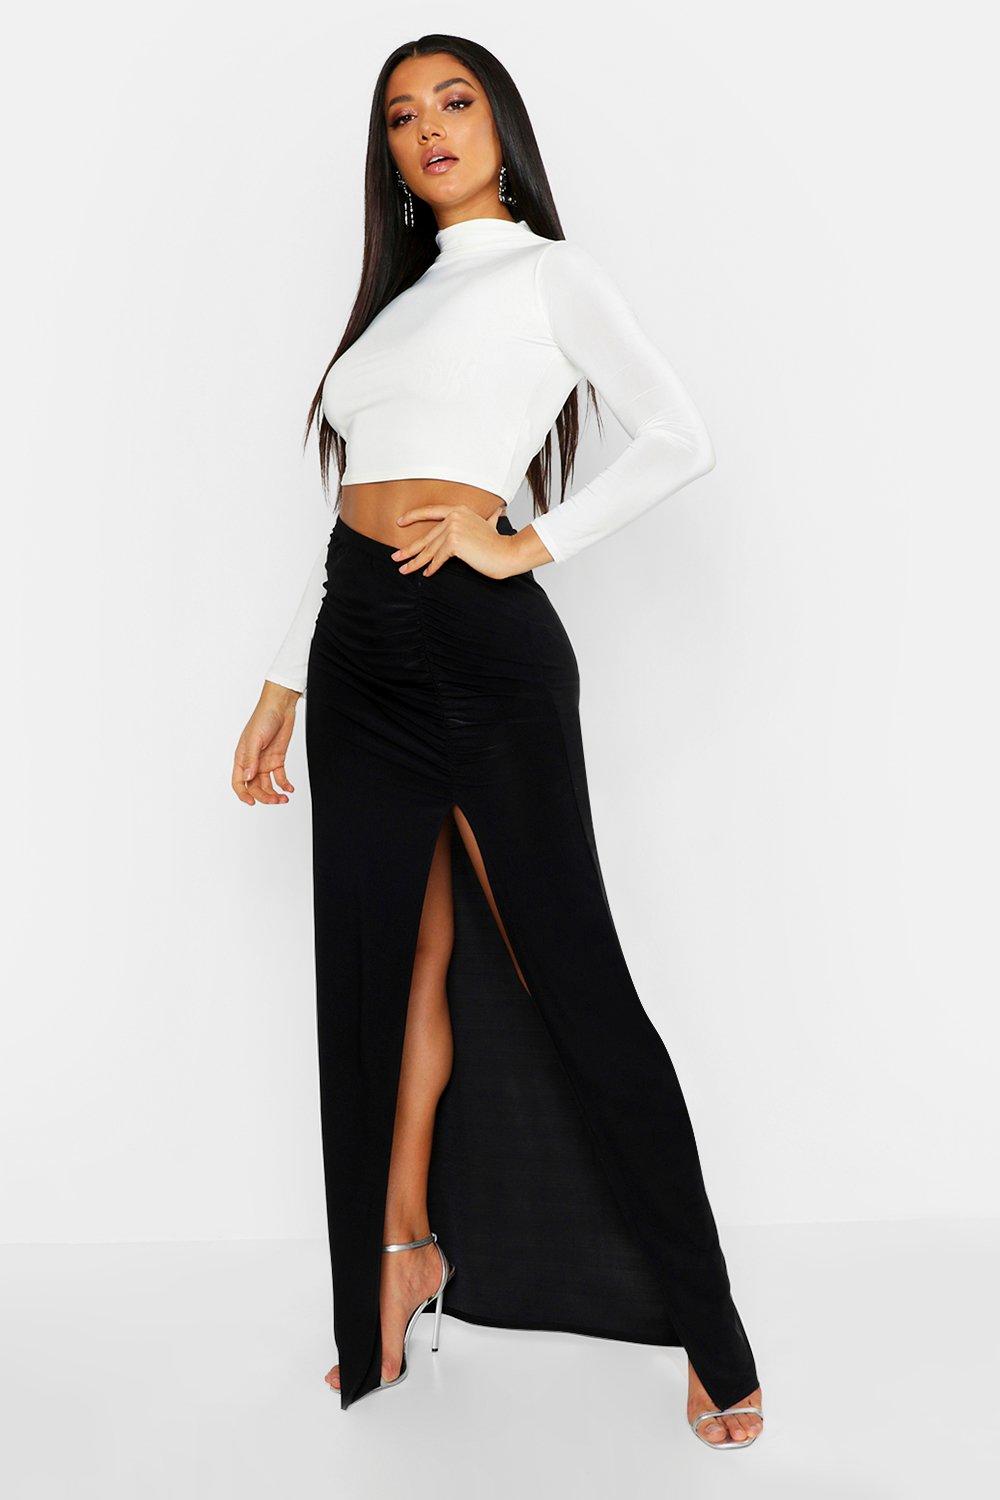 black ruched maxi skirt